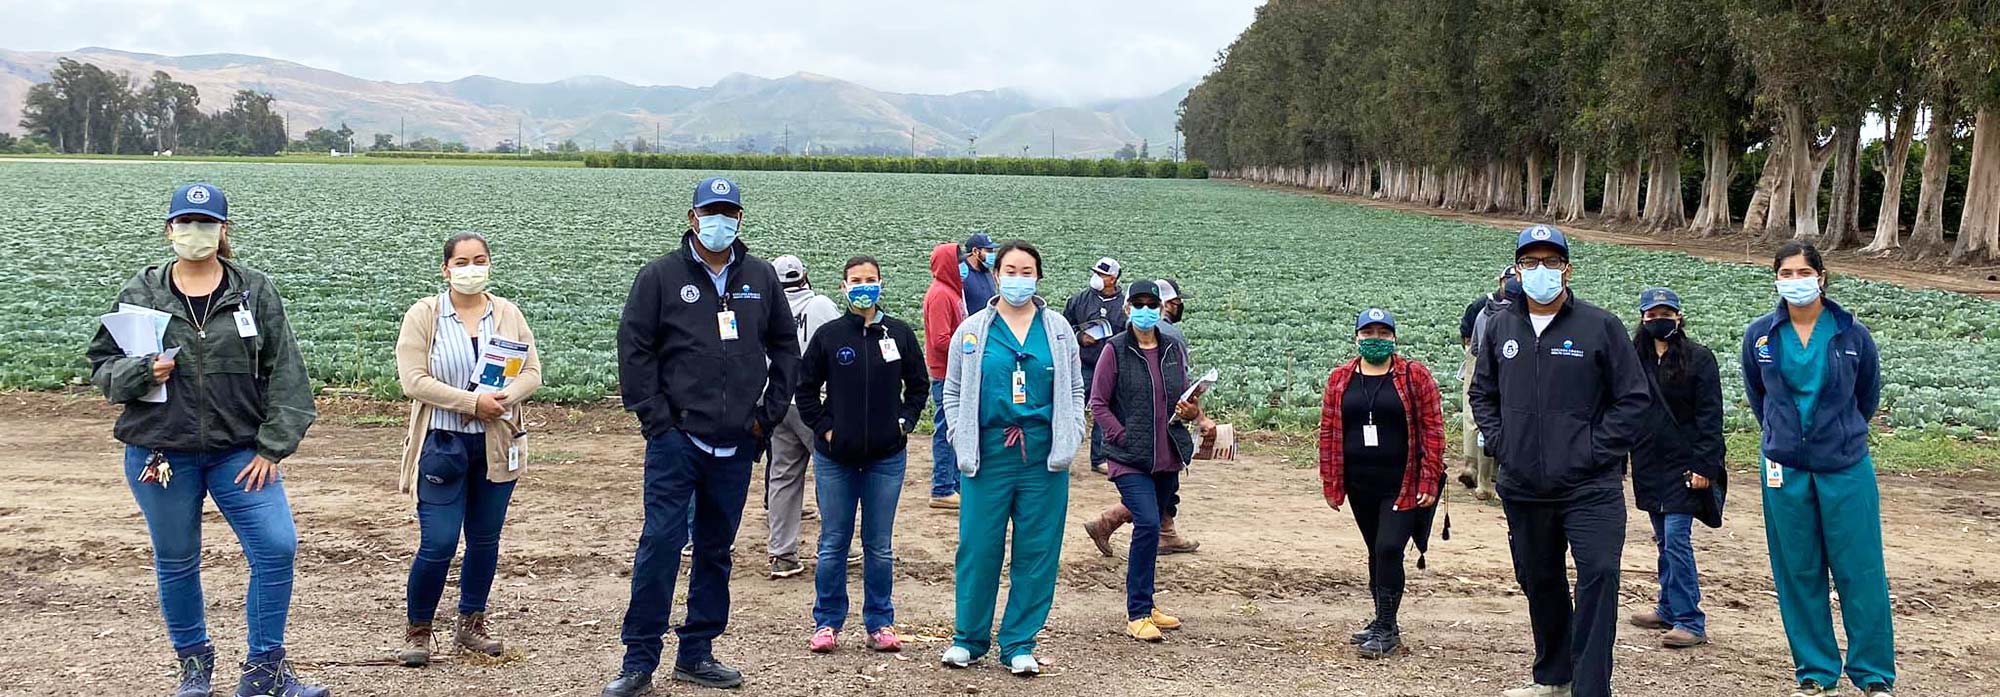 healthcare workers at farm in Monterrey, CA